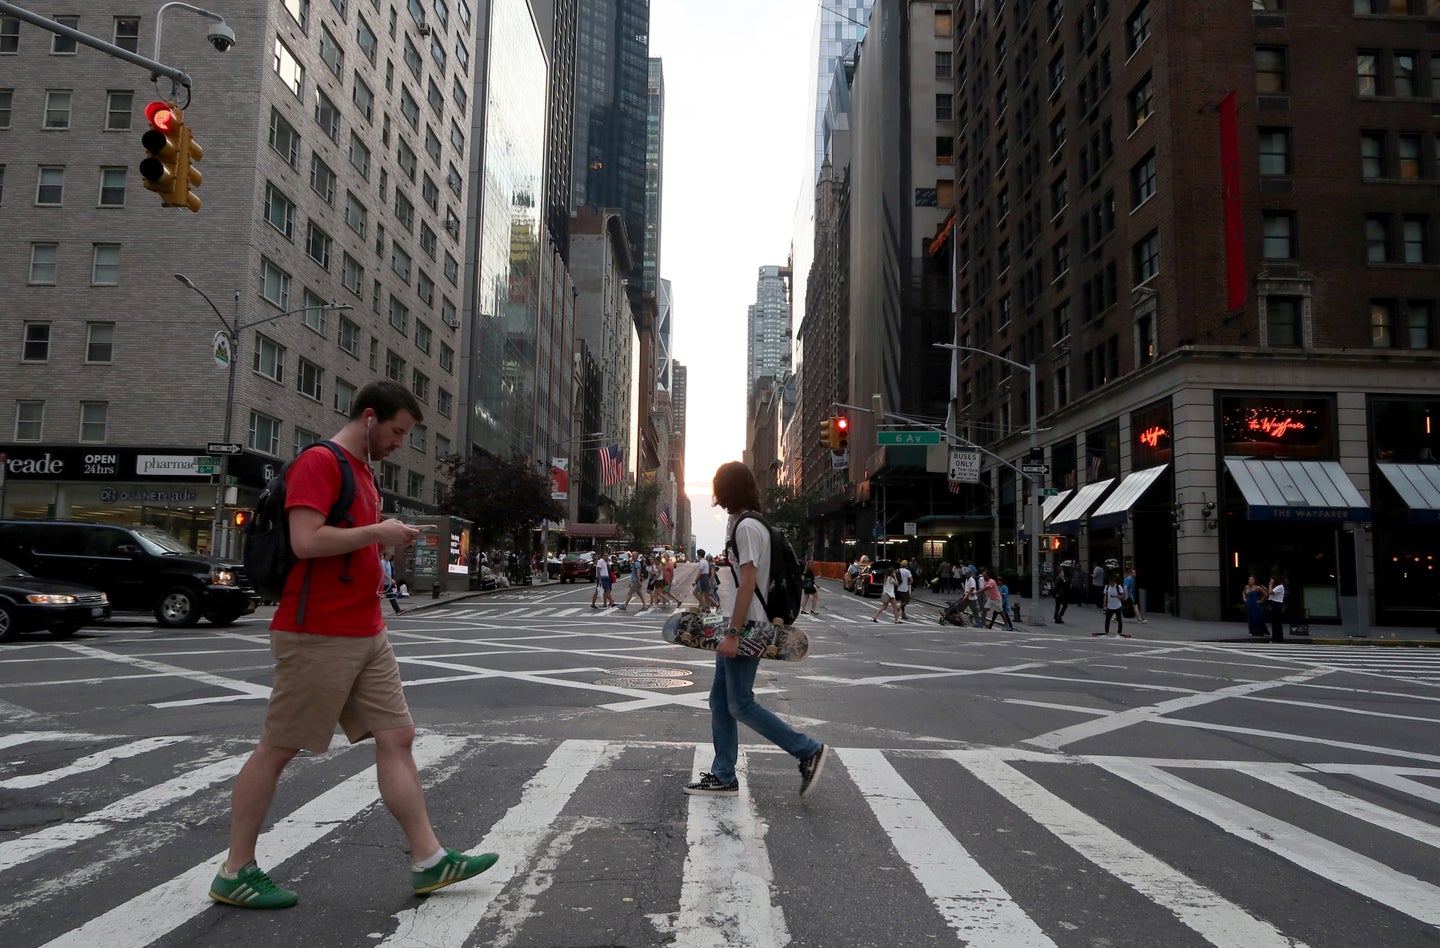 New York City Could Soon Fine You $250 for Texting While Crossing the Street